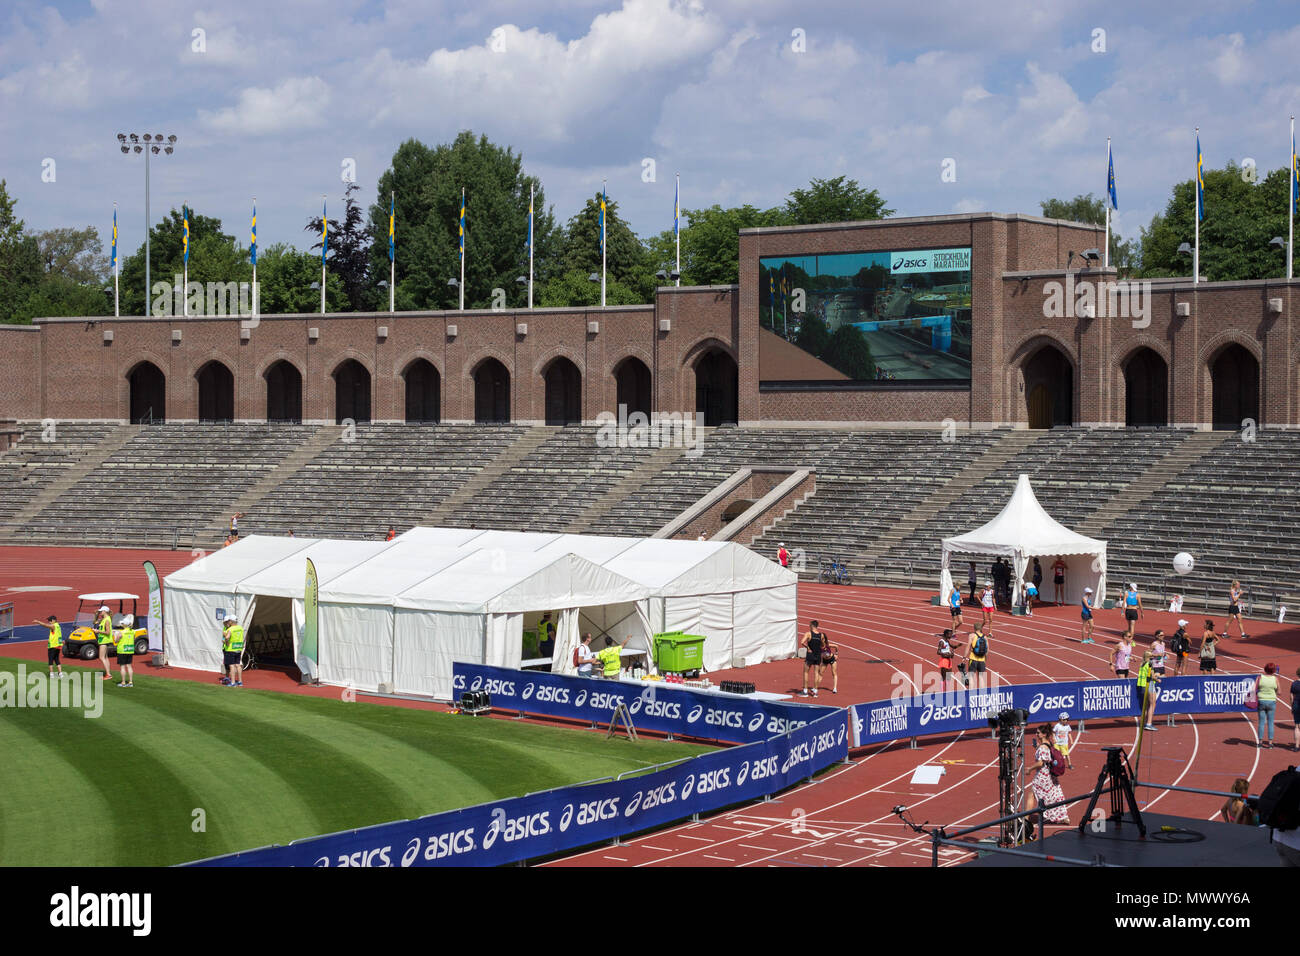 ASICS Stockholm (STHLM) Marathon 2018. Wide angle view of tents in the playground of the classical architecture of the Stadion (stadium) where the marathon is taking place. The stadion was specially built to host the Olympic Games in 1912.  Stockholm, Sweden. 2nd June 2018. Credit: BasilT/Alamy Live News Stock Photo